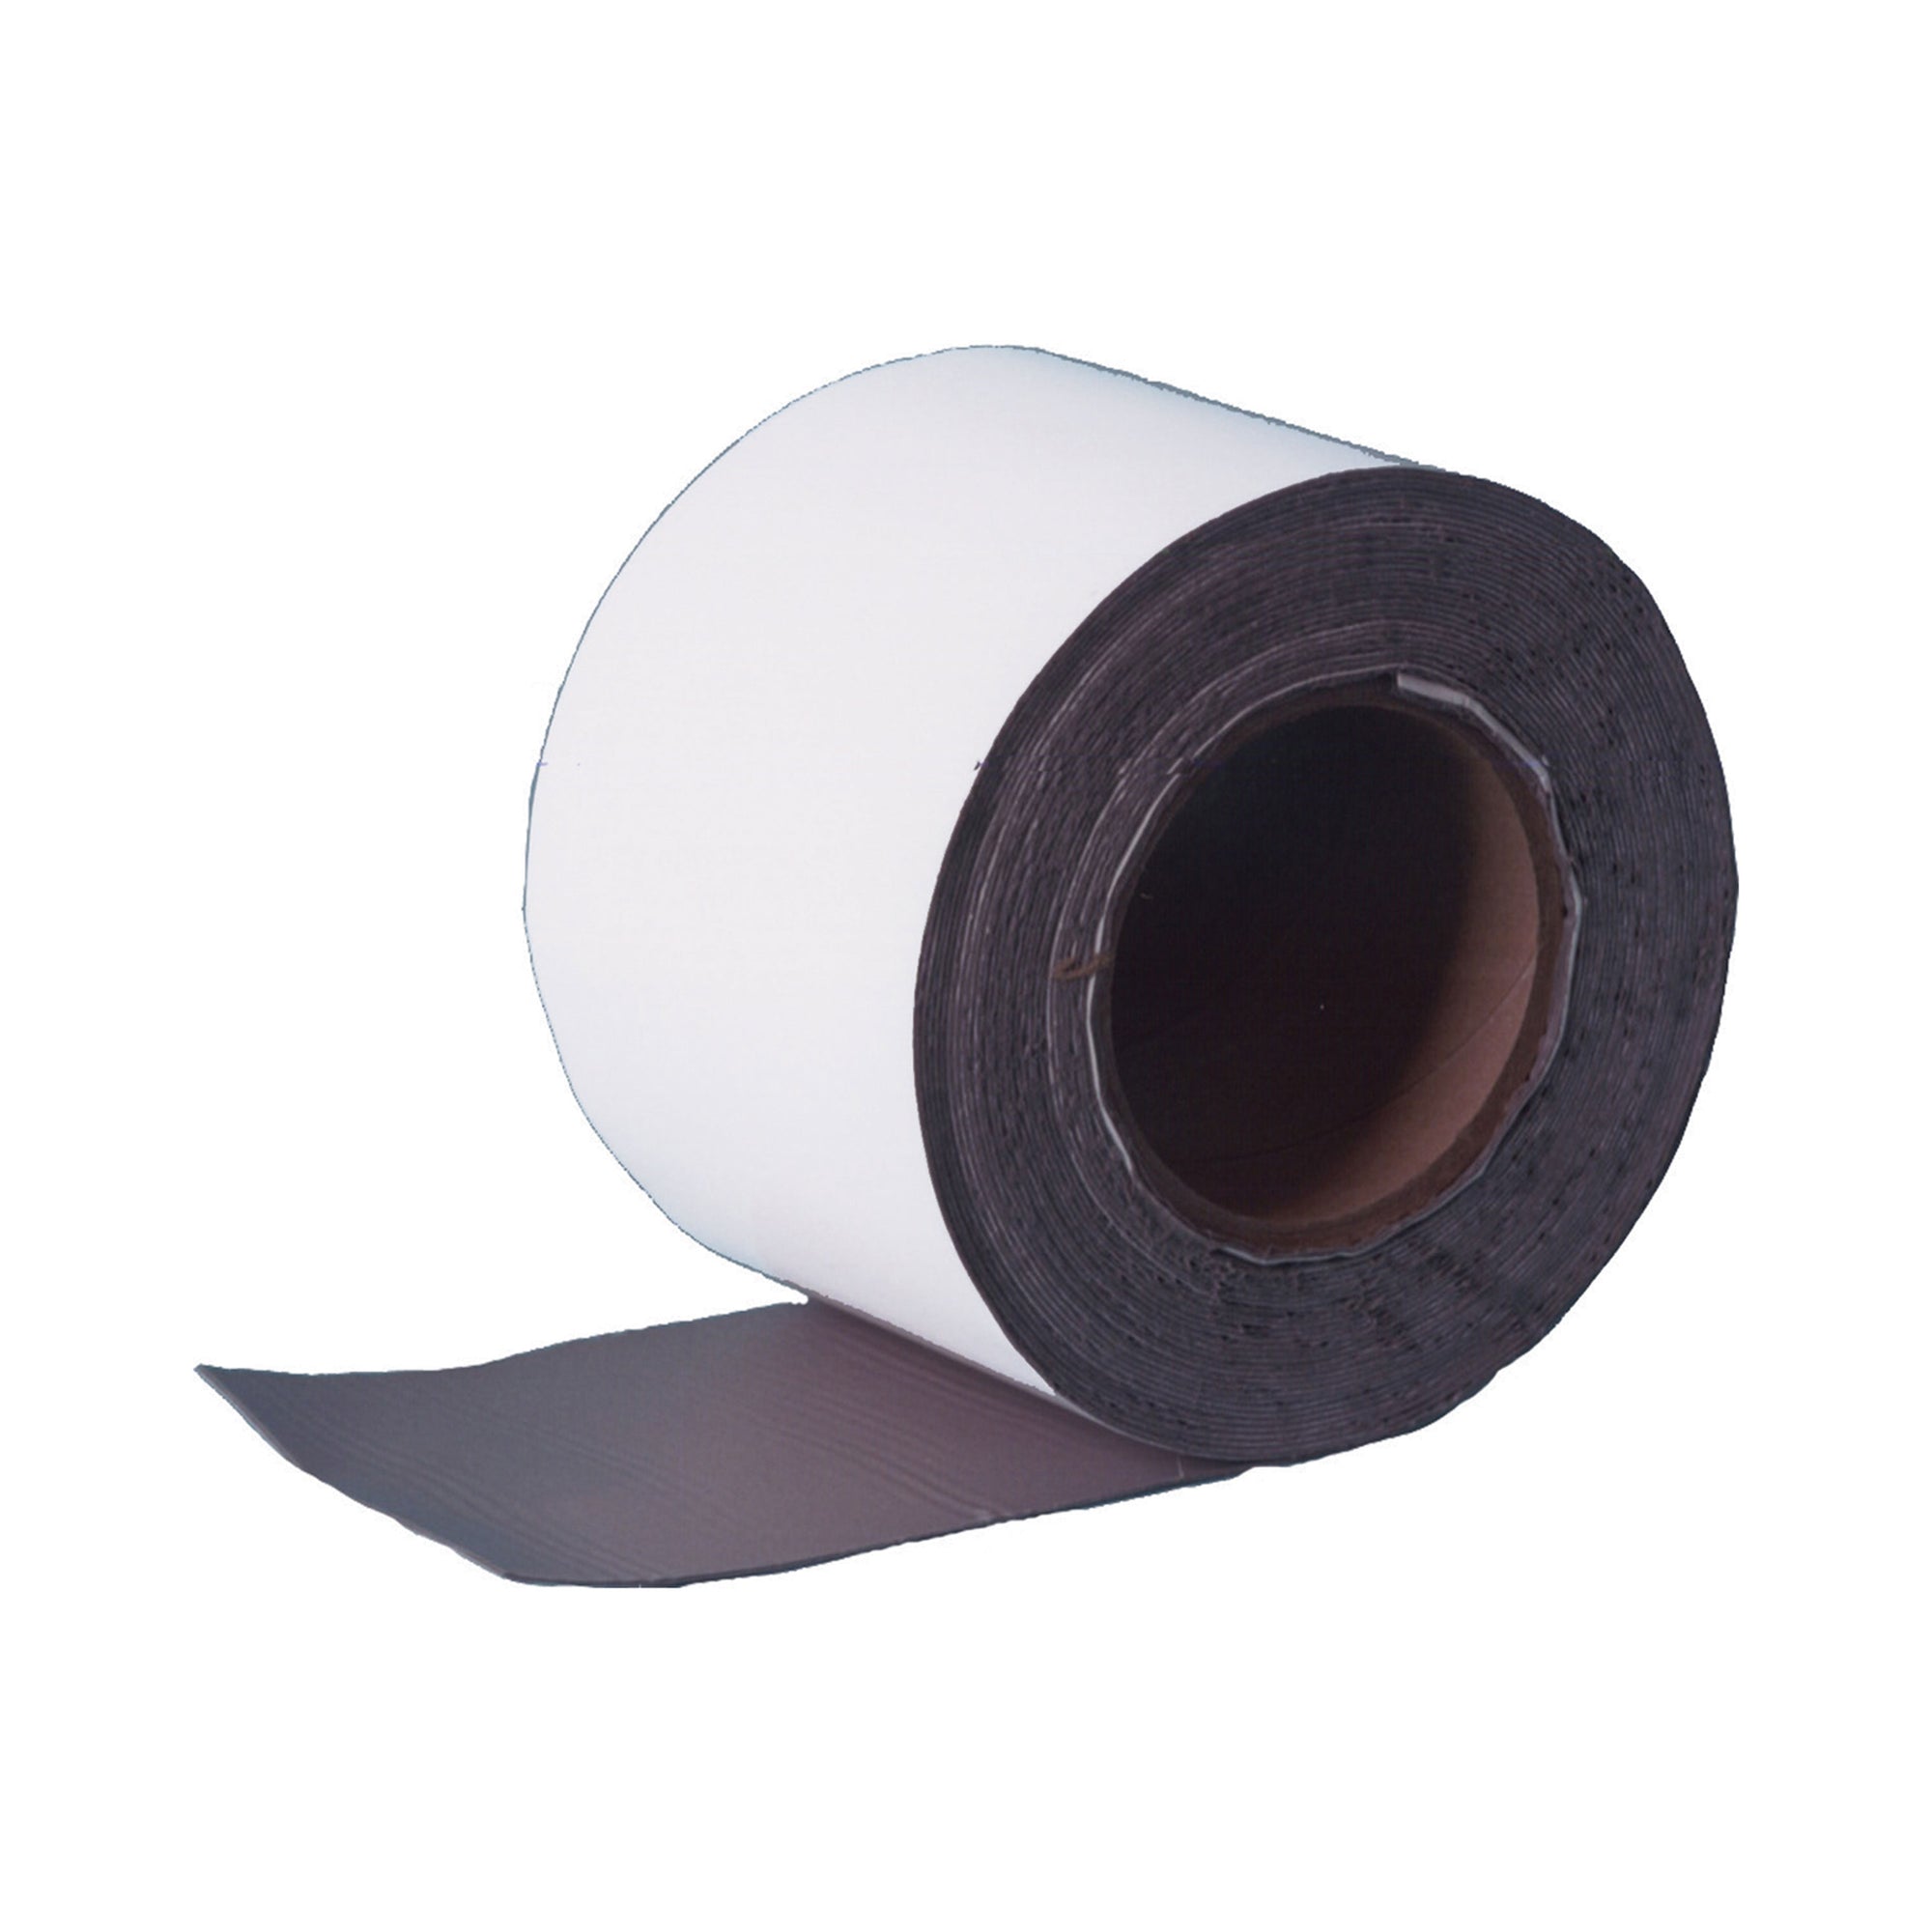 EternaBond RSW-4-50 RoofSeal Sealant Tape - 4" x 50', White